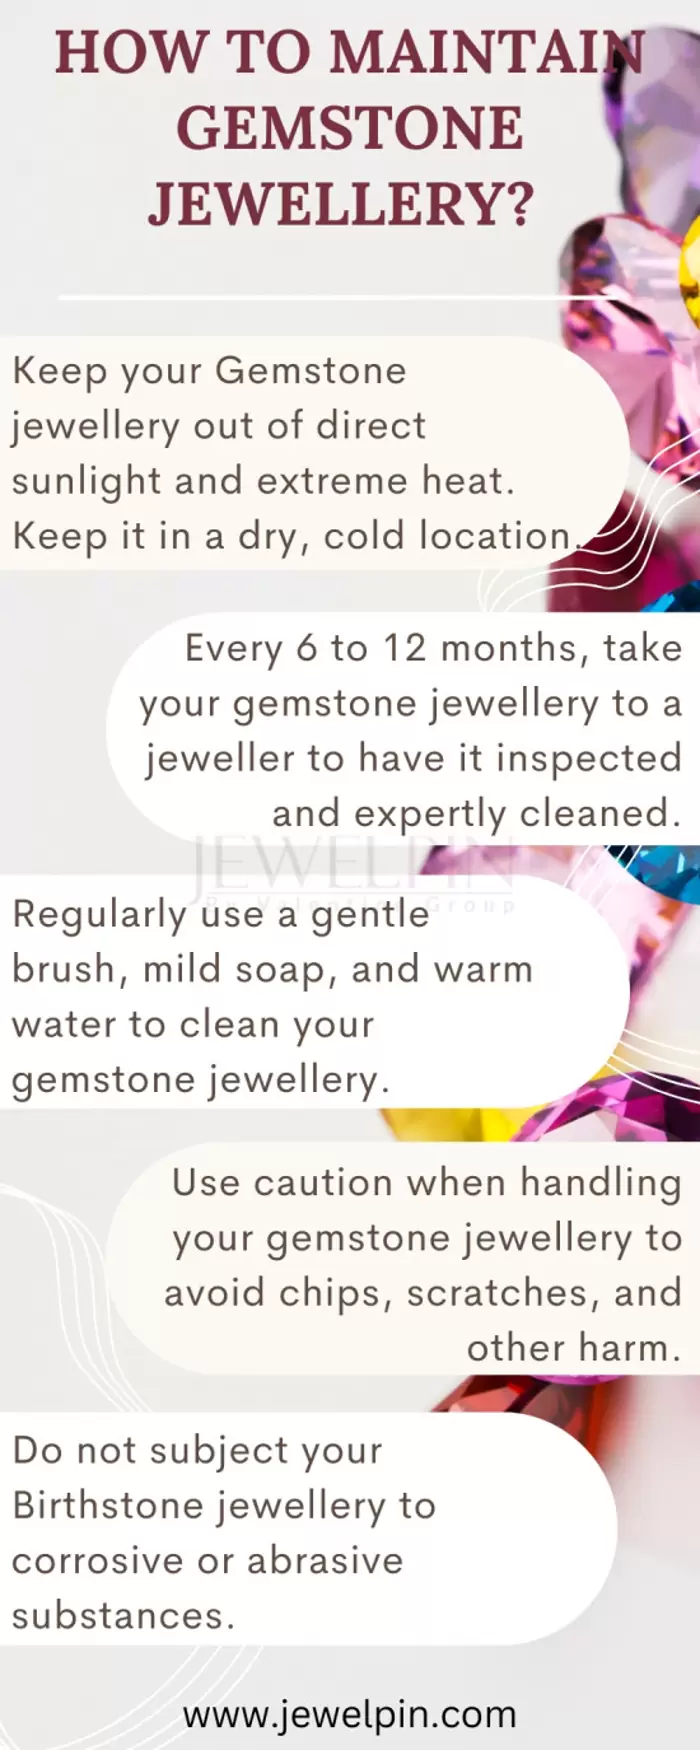 ₹ 10.000 Info graphic on how to maintain gemstone jewellery